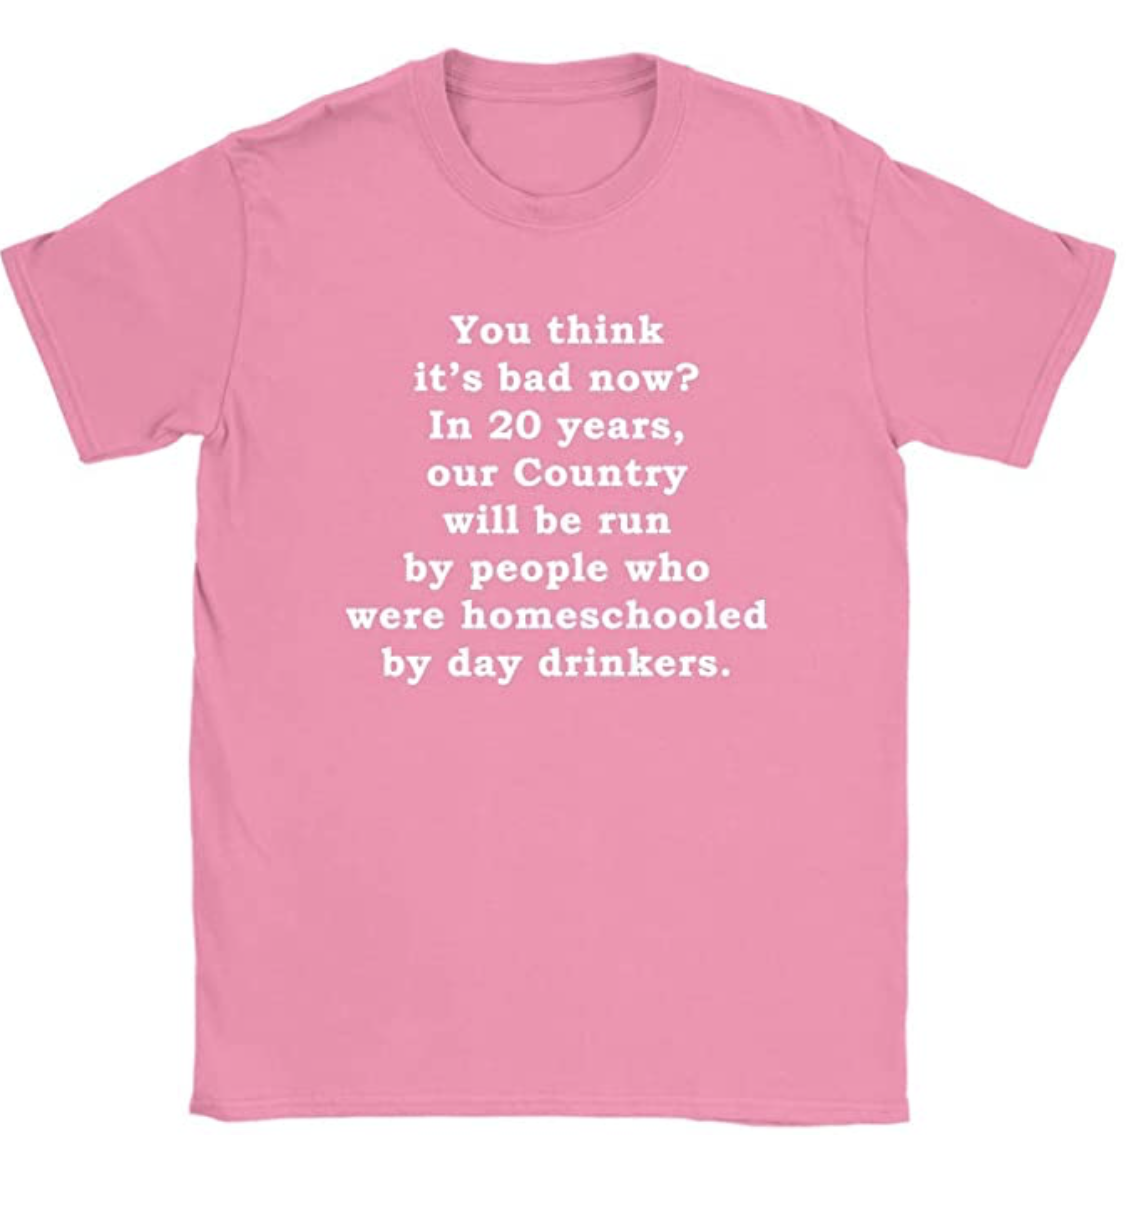 You Think It’s Bad Now? in 20 Years Our Country Will Be Run by People Who were Homeschooled by Day Drinkers Womens T-Shirt